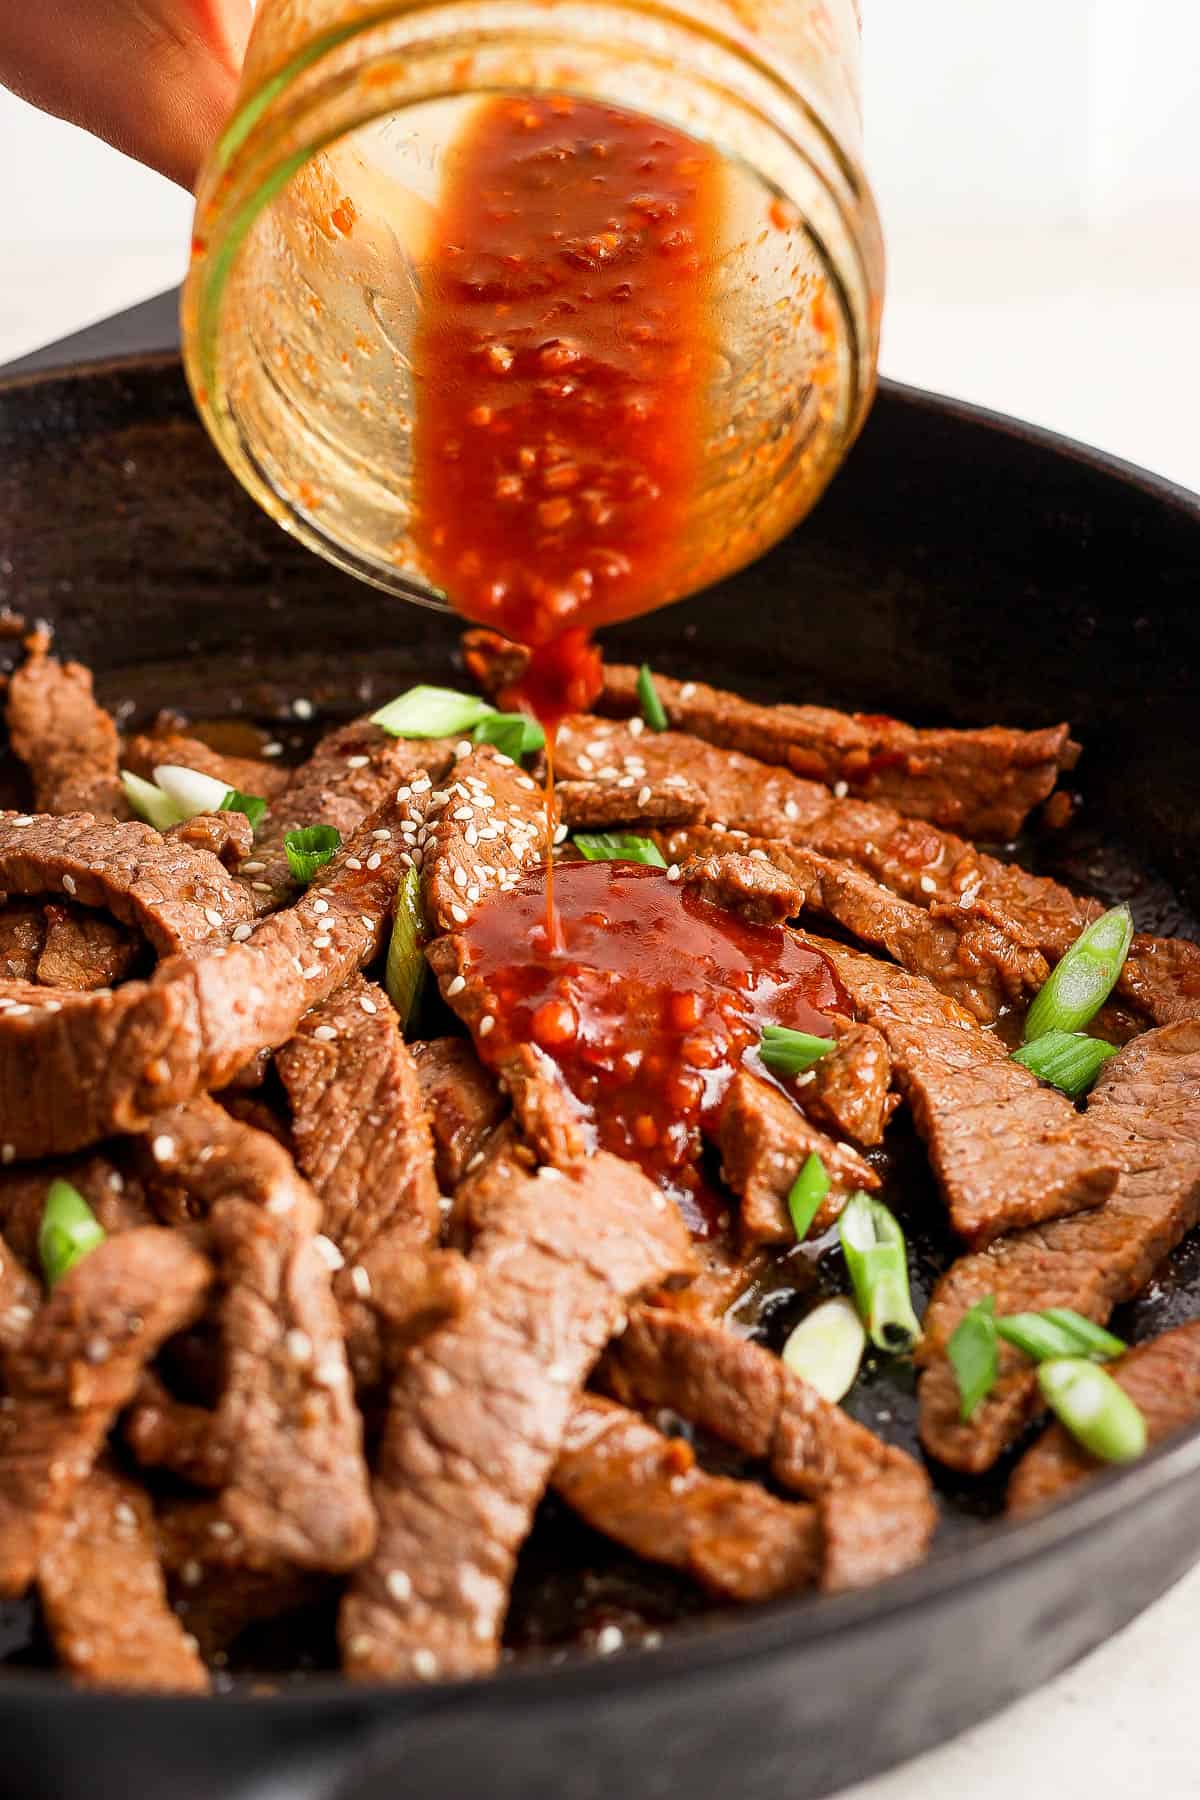 Extra sauce being poured over the beef strips in the skillet topped with sesame seeds and sliced green onions.